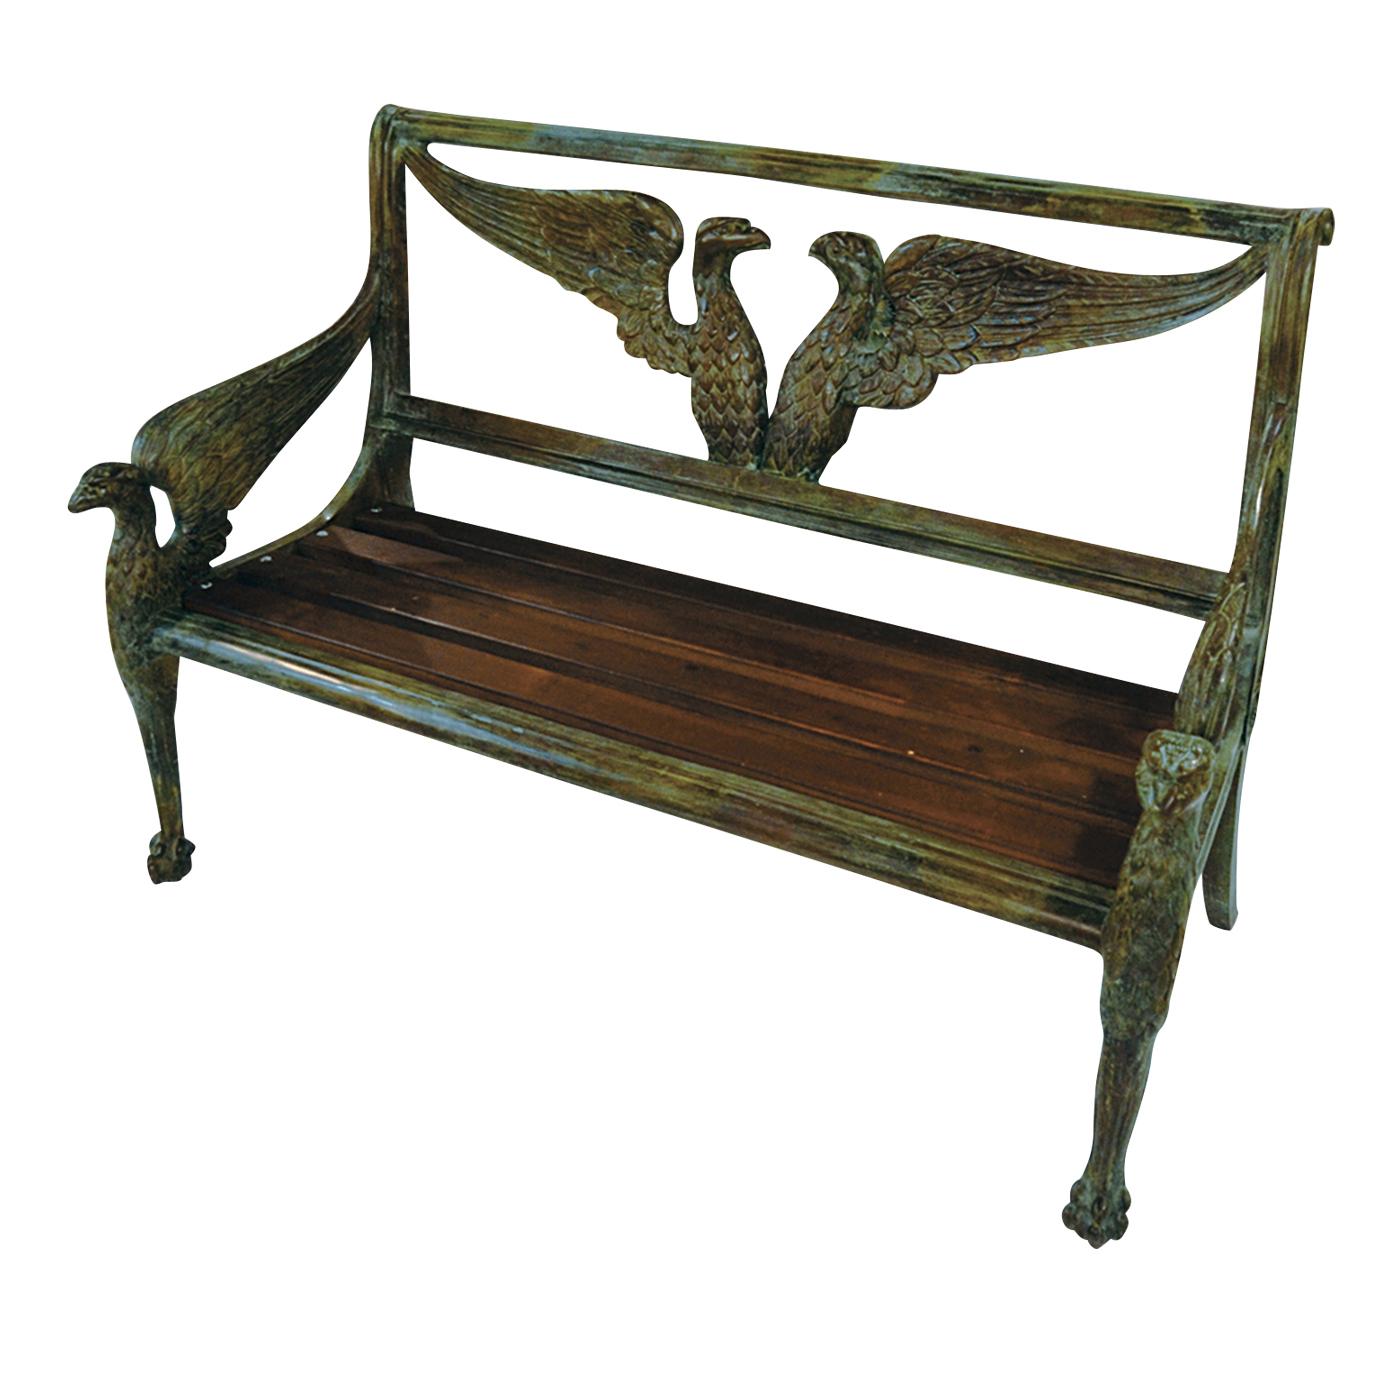 This exquisite bench features a seat in wood and a structure magnificently executed in bronze using the lost-wax technique. The two front legs are in the shape of an eagle portrayed in profile with its wings spread backwards to form the armrests.